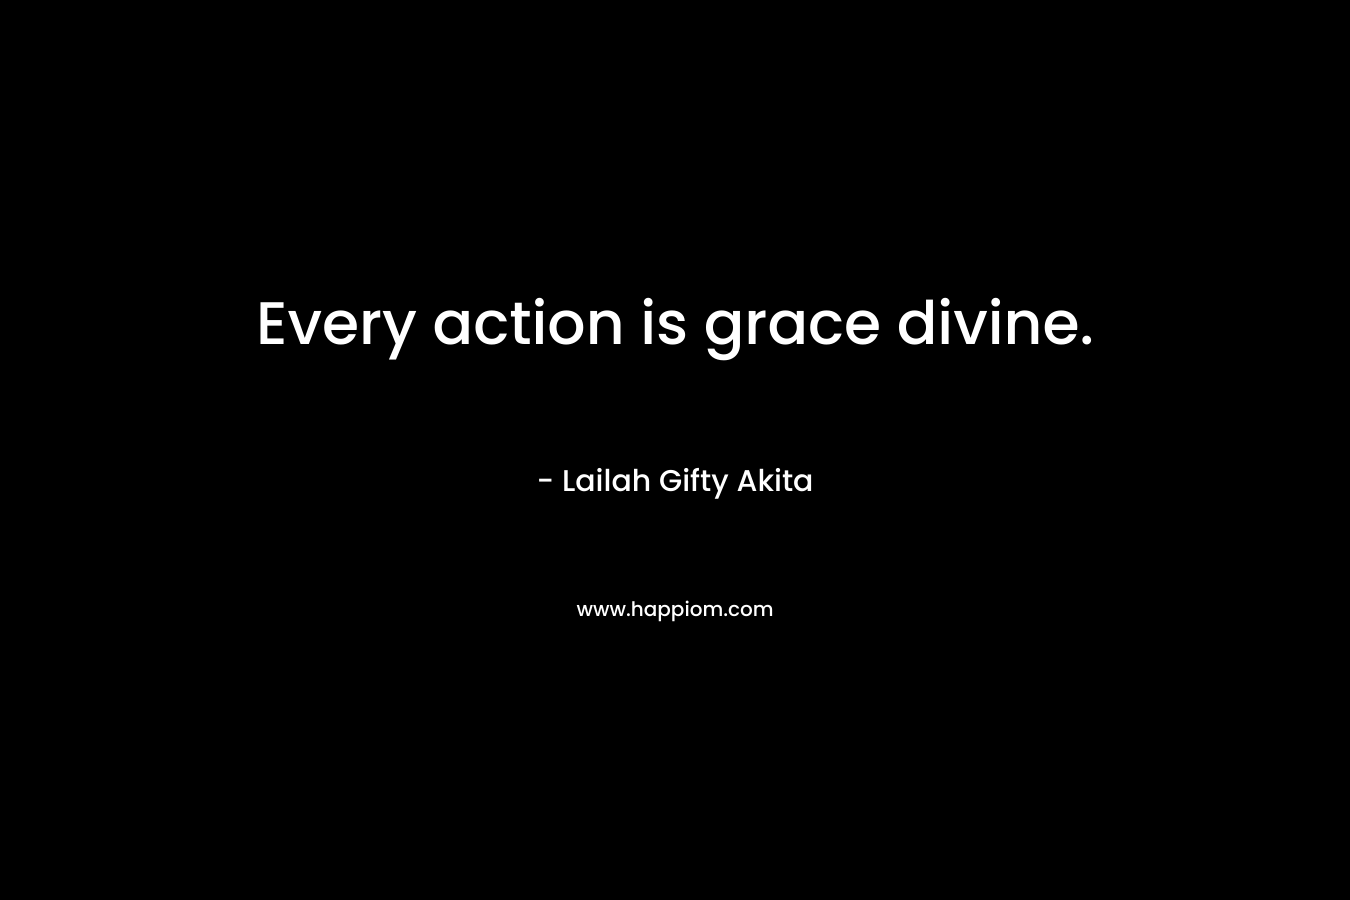 Every action is grace divine.